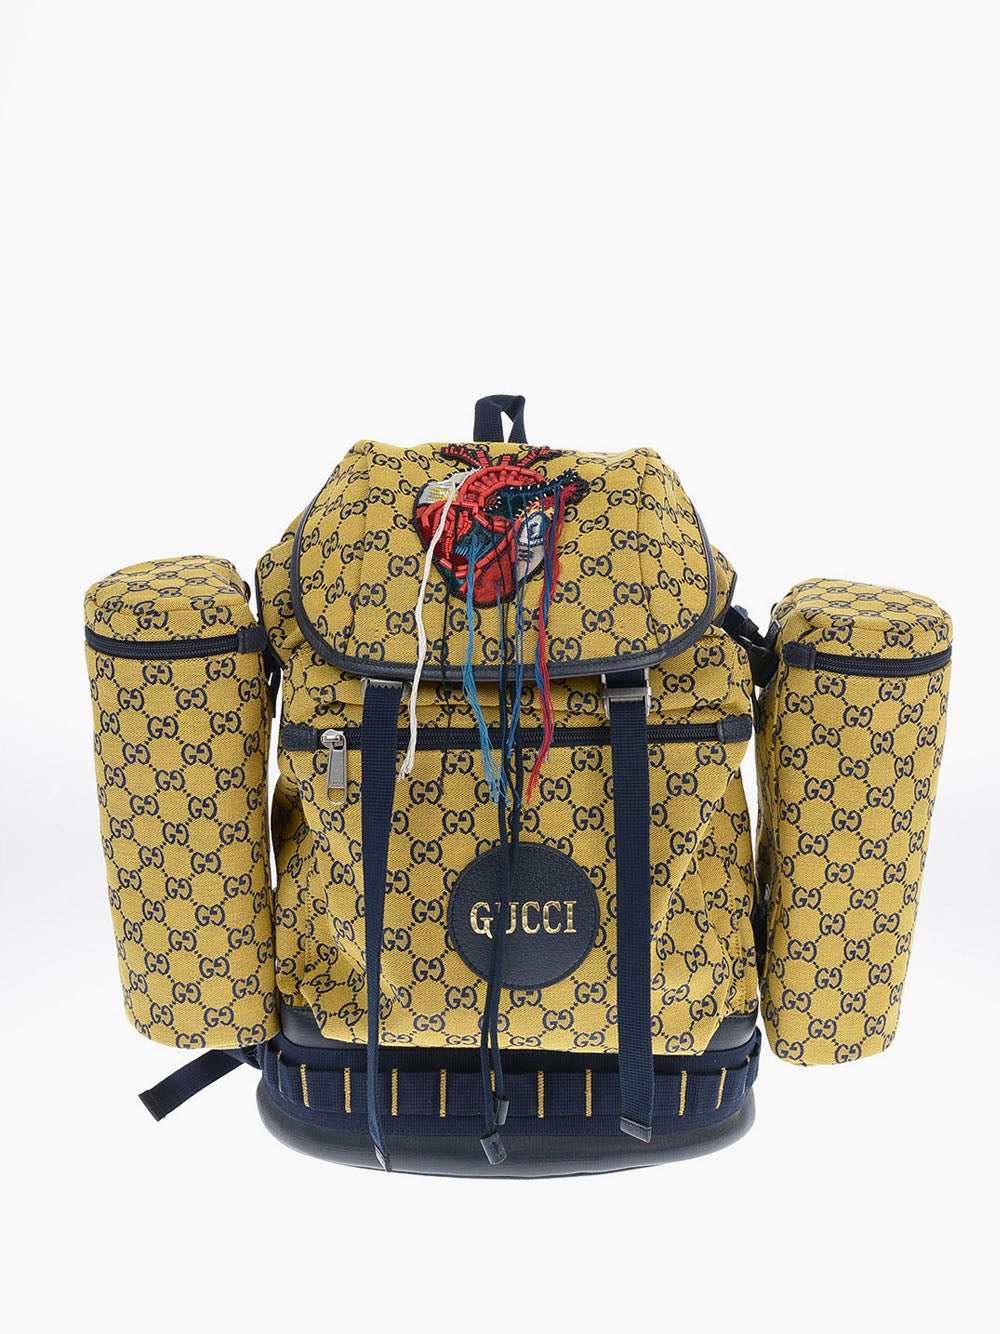 GUCCI MAXI MONOGRAM UTILITY GG BACKPACK